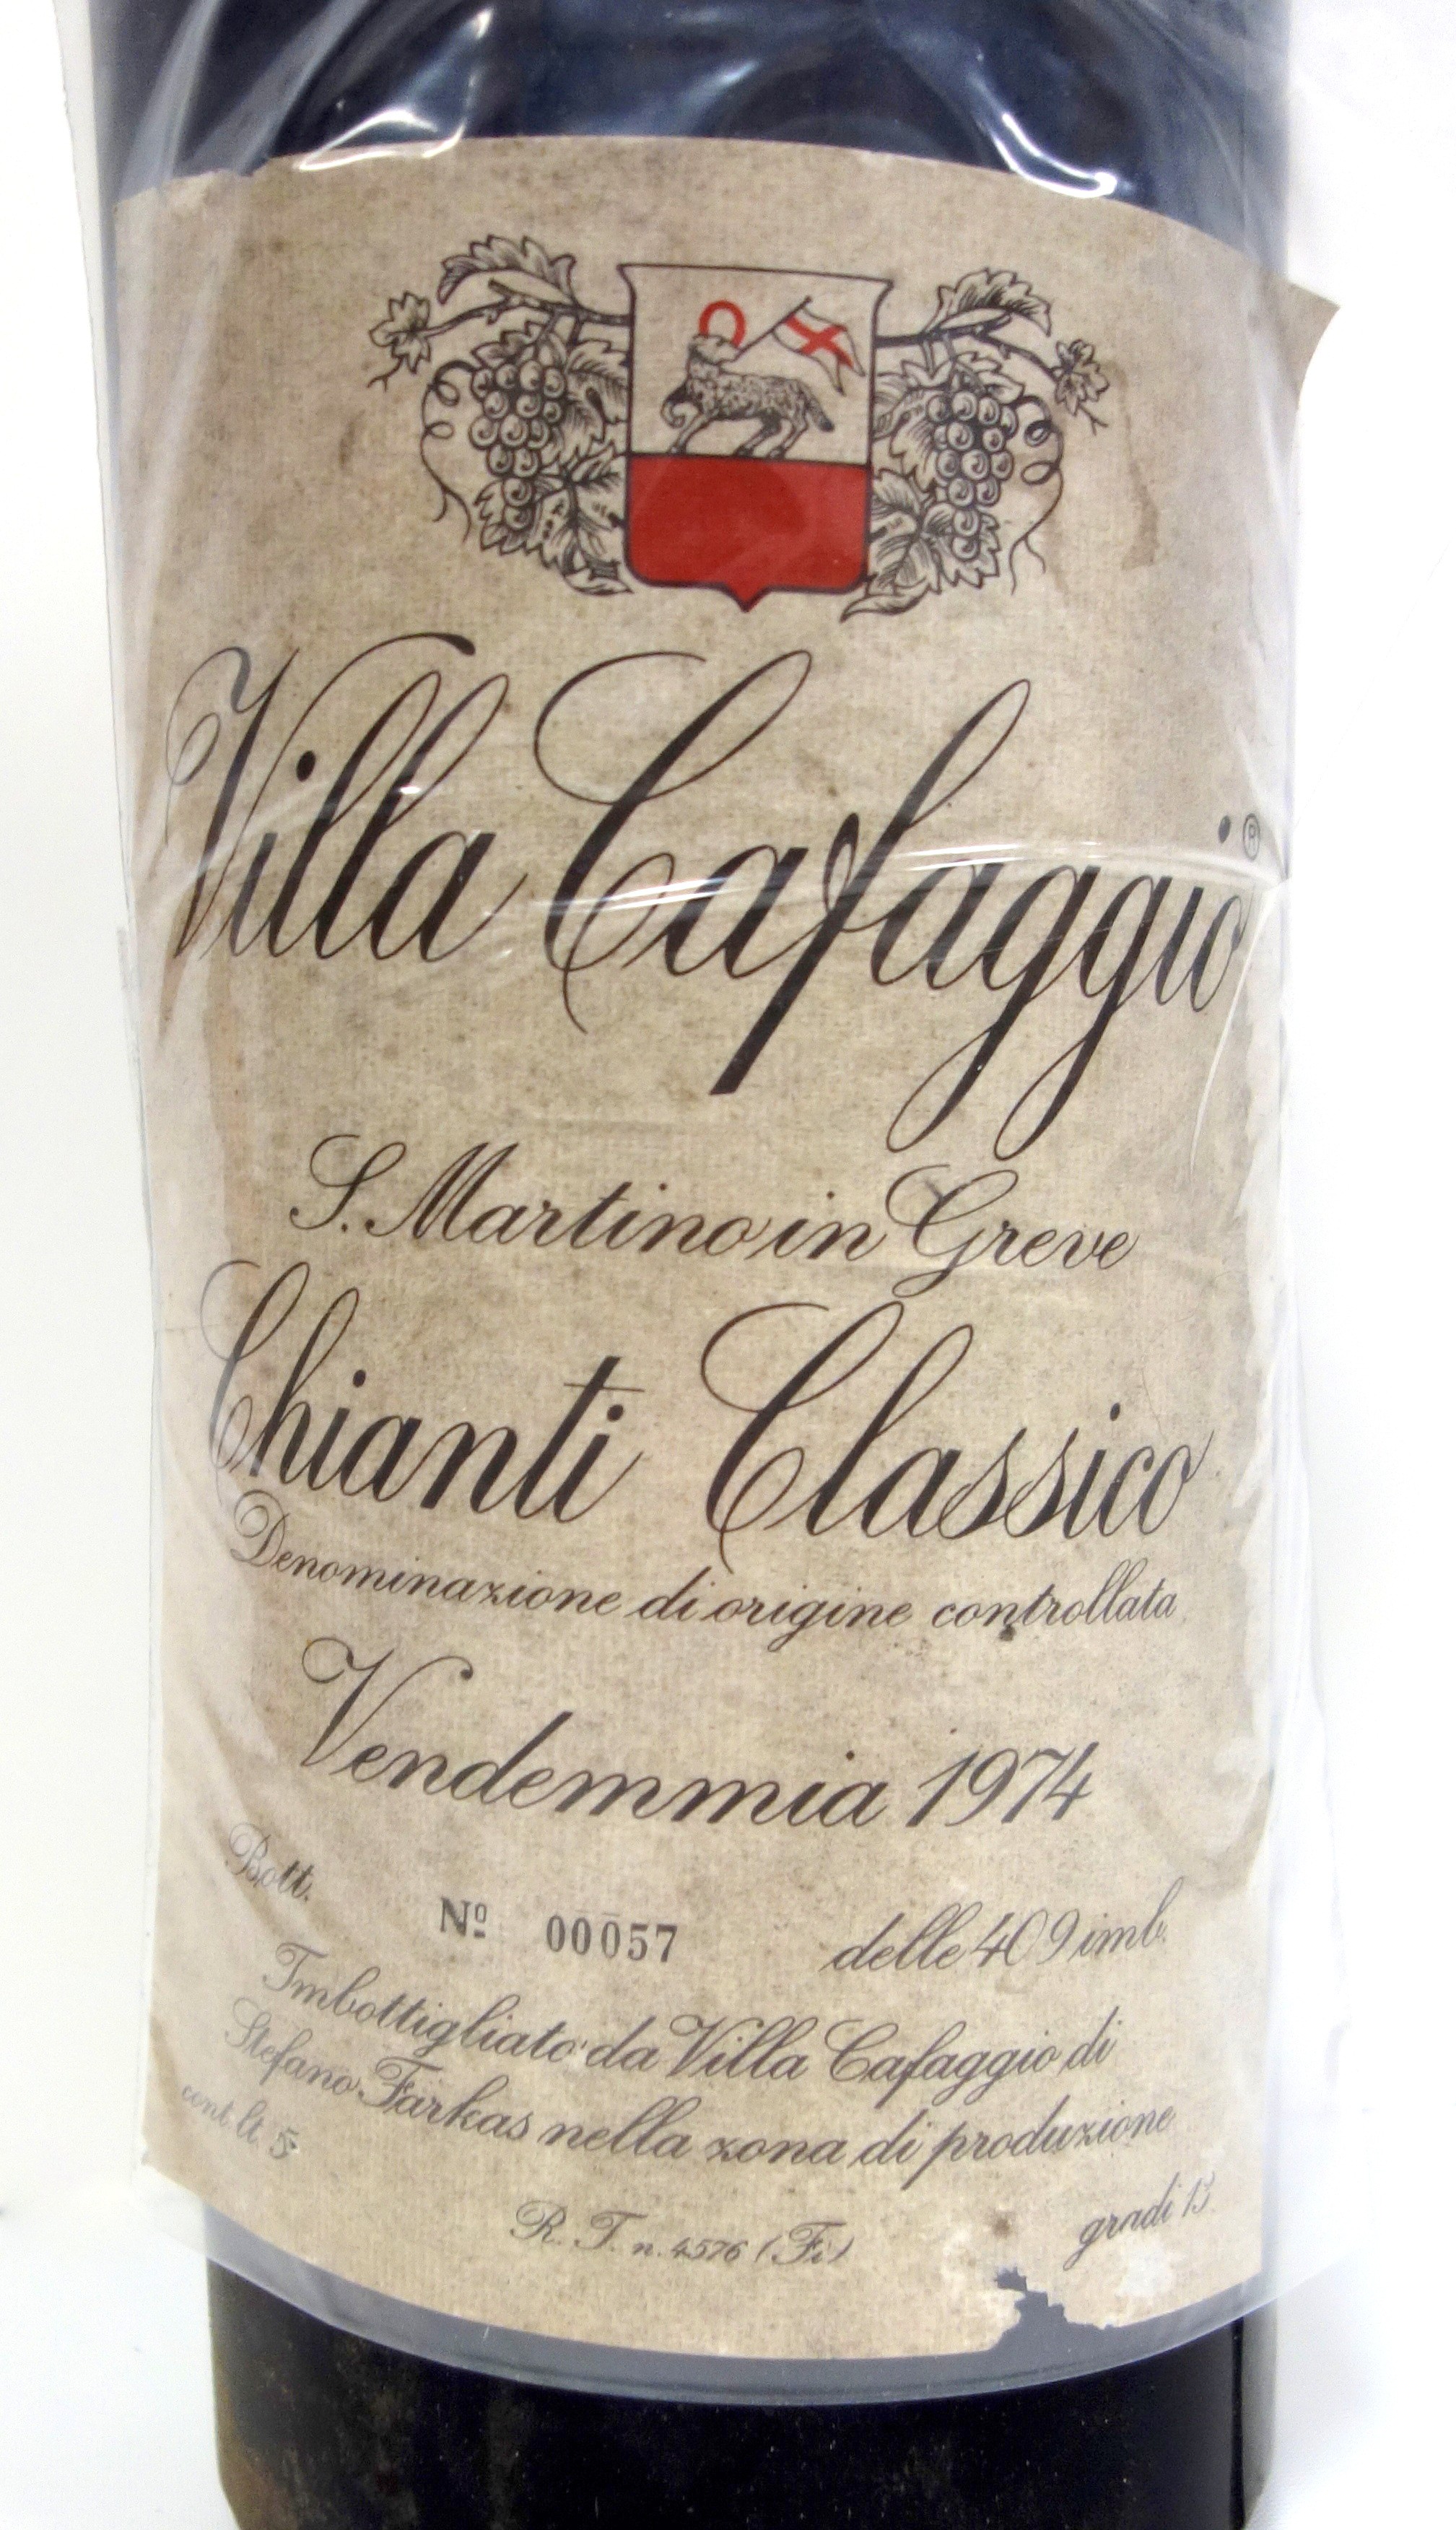 1 x 5 litre bottle Villa Caffagio, Chianti Classico, 1974, Numbered 00057, with red wax cap - Image 2 of 3